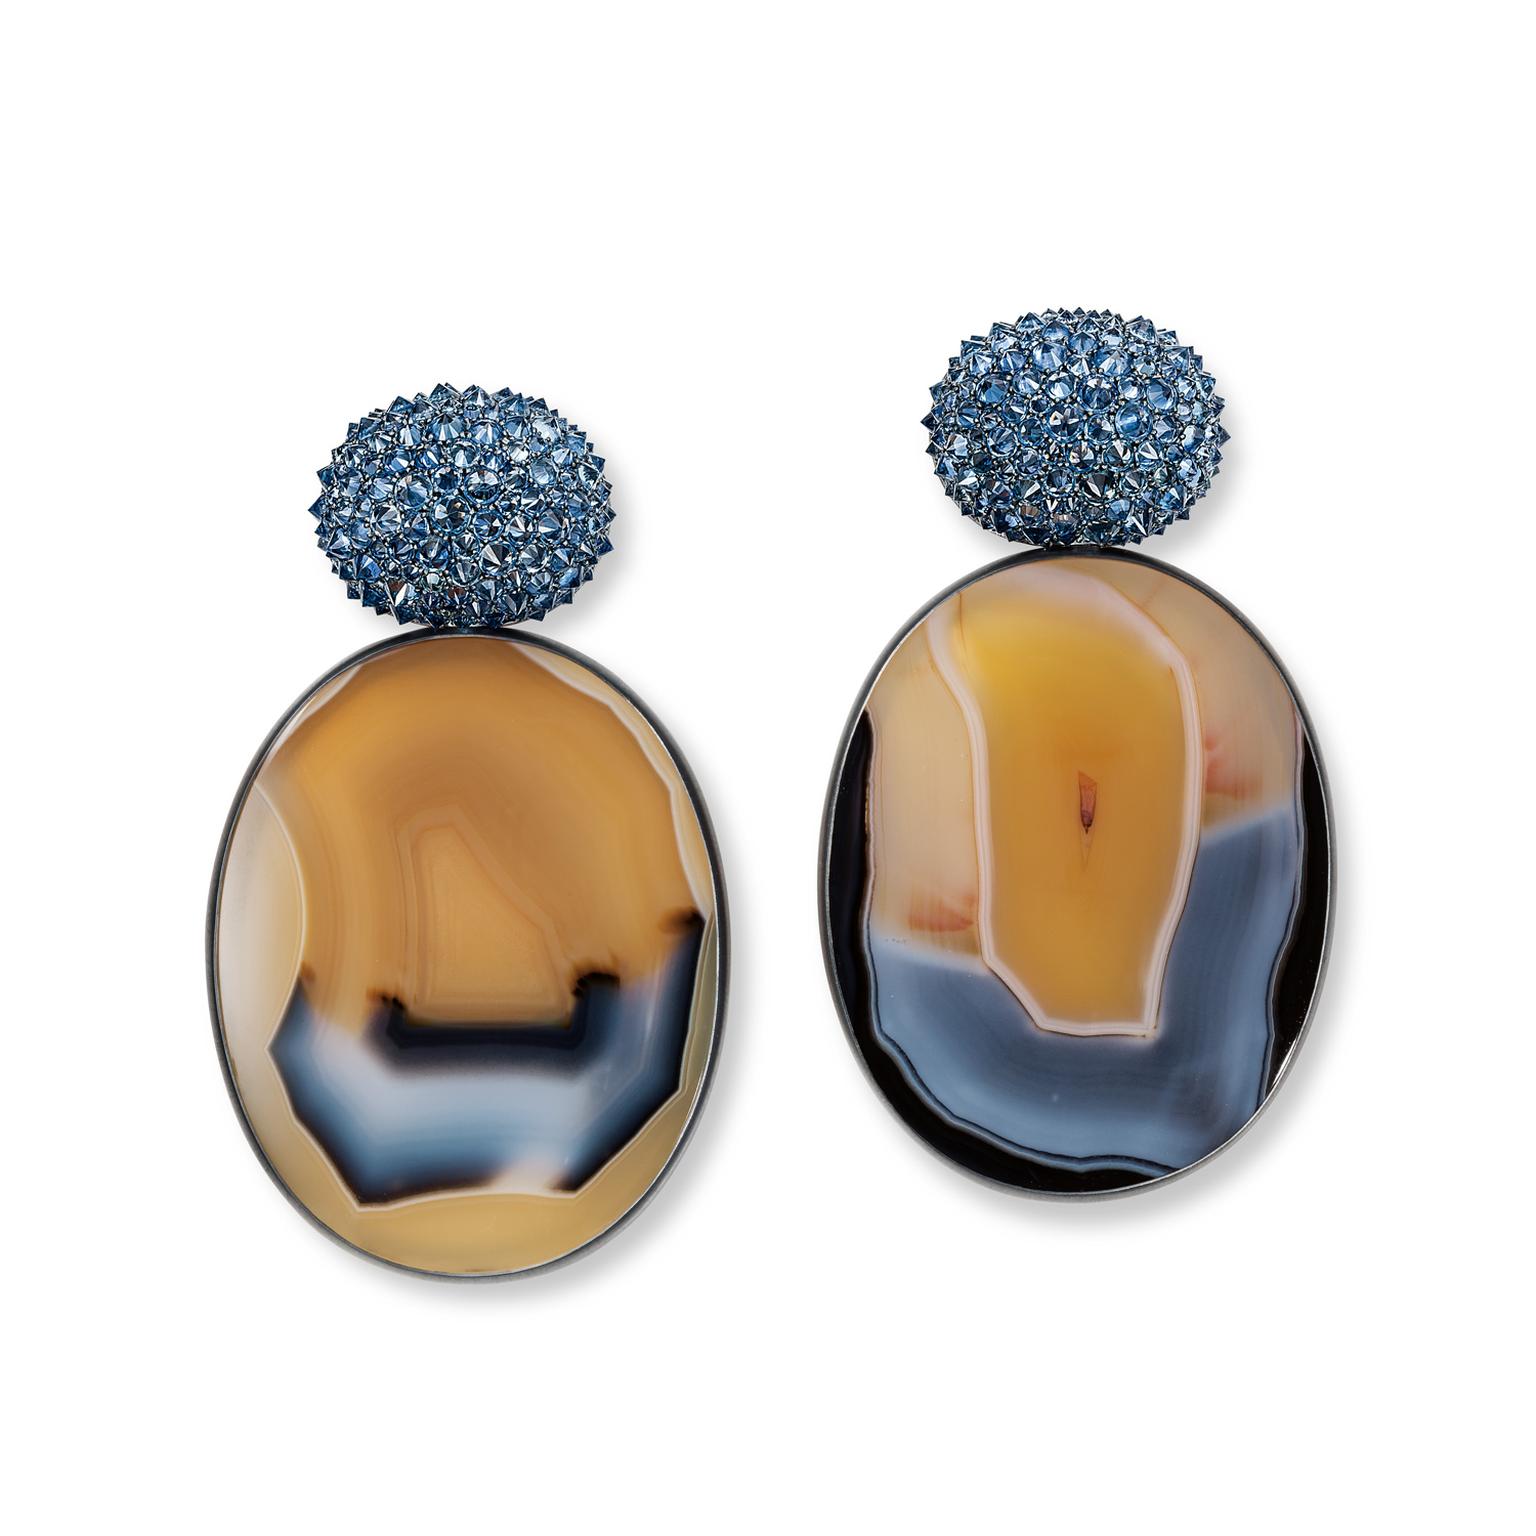 Hemmerle blue and yellow agate earrings